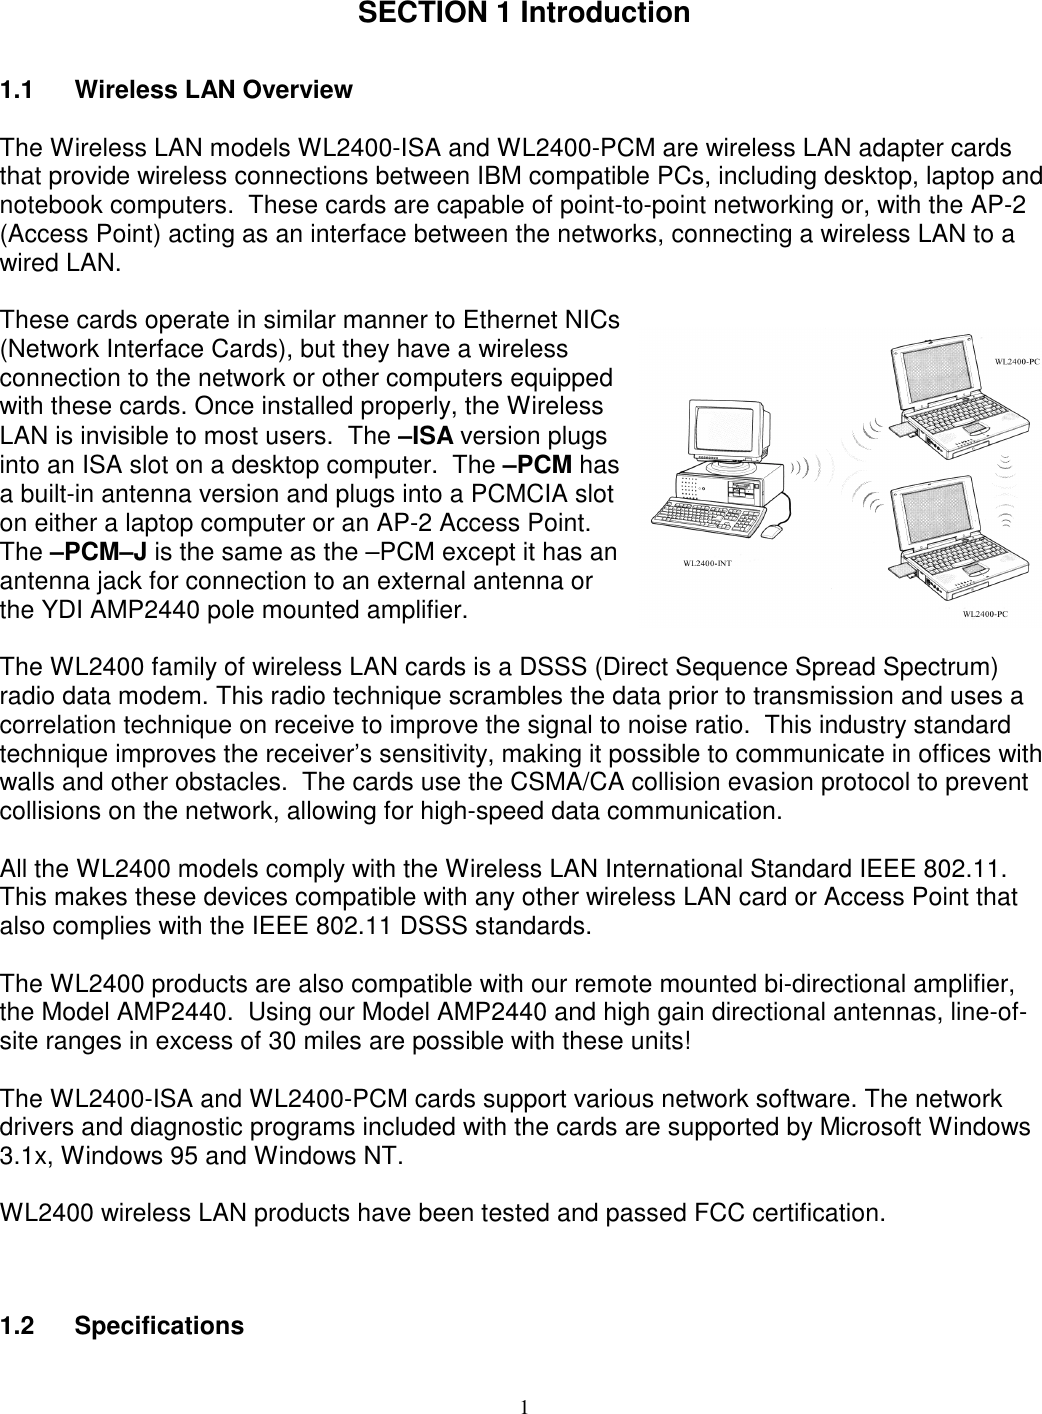 1SECTION 1 Introduction1.1 Wireless LAN OverviewThe Wireless LAN models WL2400-ISA and WL2400-PCM are wireless LAN adapter cardsthat provide wireless connections between IBM compatible PCs, including desktop, laptop andnotebook computers.  These cards are capable of point-to-point networking or, with the AP-2(Access Point) acting as an interface between the networks, connecting a wireless LAN to awired LAN.These cards operate in similar manner to Ethernet NICs(Network Interface Cards), but they have a wirelessconnection to the network or other computers equippedwith these cards. Once installed properly, the WirelessLAN is invisible to most users.  The –ISA version plugsinto an ISA slot on a desktop computer.  The –PCM hasa built-in antenna version and plugs into a PCMCIA sloton either a laptop computer or an AP-2 Access Point.The –PCM–J is the same as the –PCM except it has anantenna jack for connection to an external antenna orthe YDI AMP2440 pole mounted amplifier.The WL2400 family of wireless LAN cards is a DSSS (Direct Sequence Spread Spectrum)radio data modem. This radio technique scrambles the data prior to transmission and uses acorrelation technique on receive to improve the signal to noise ratio.  This industry standardtechnique improves the receiver’s sensitivity, making it possible to communicate in offices withwalls and other obstacles.  The cards use the CSMA/CA collision evasion protocol to preventcollisions on the network, allowing for high-speed data communication.All the WL2400 models comply with the Wireless LAN International Standard IEEE 802.11.This makes these devices compatible with any other wireless LAN card or Access Point thatalso complies with the IEEE 802.11 DSSS standards.The WL2400 products are also compatible with our remote mounted bi-directional amplifier,the Model AMP2440.  Using our Model AMP2440 and high gain directional antennas, line-of-site ranges in excess of 30 miles are possible with these units!The WL2400-ISA and WL2400-PCM cards support various network software. The networkdrivers and diagnostic programs included with the cards are supported by Microsoft Windows3.1x, Windows 95 and Windows NT.WL2400 wireless LAN products have been tested and passed FCC certification.1.2 Specifications